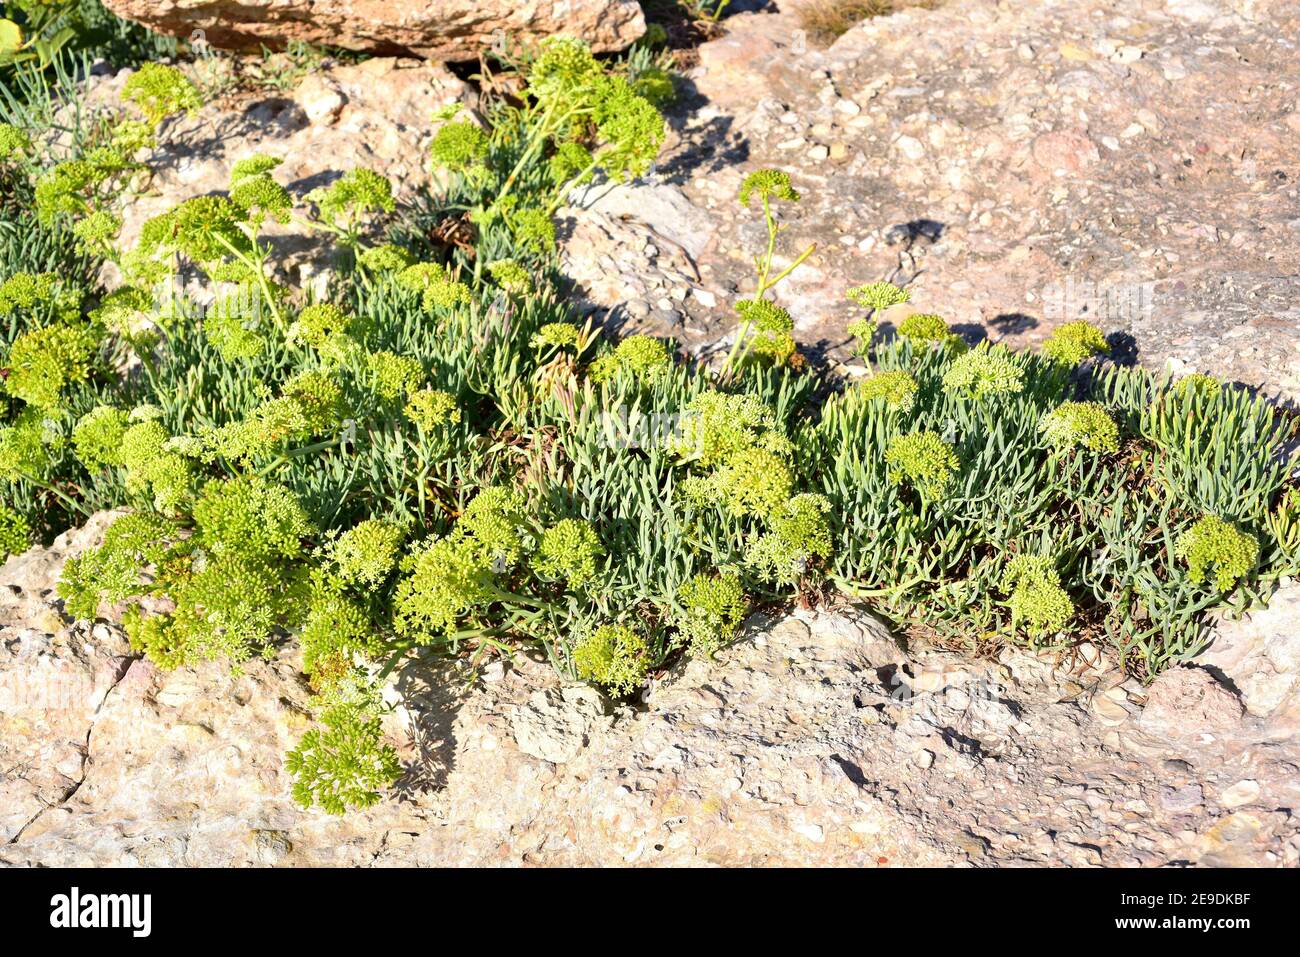 Sea fennel or rock samphire (Crithmum maritimum) is an edible perennial plant native to Europe coasts and northern Africa. This photo was taken in Stock Photo